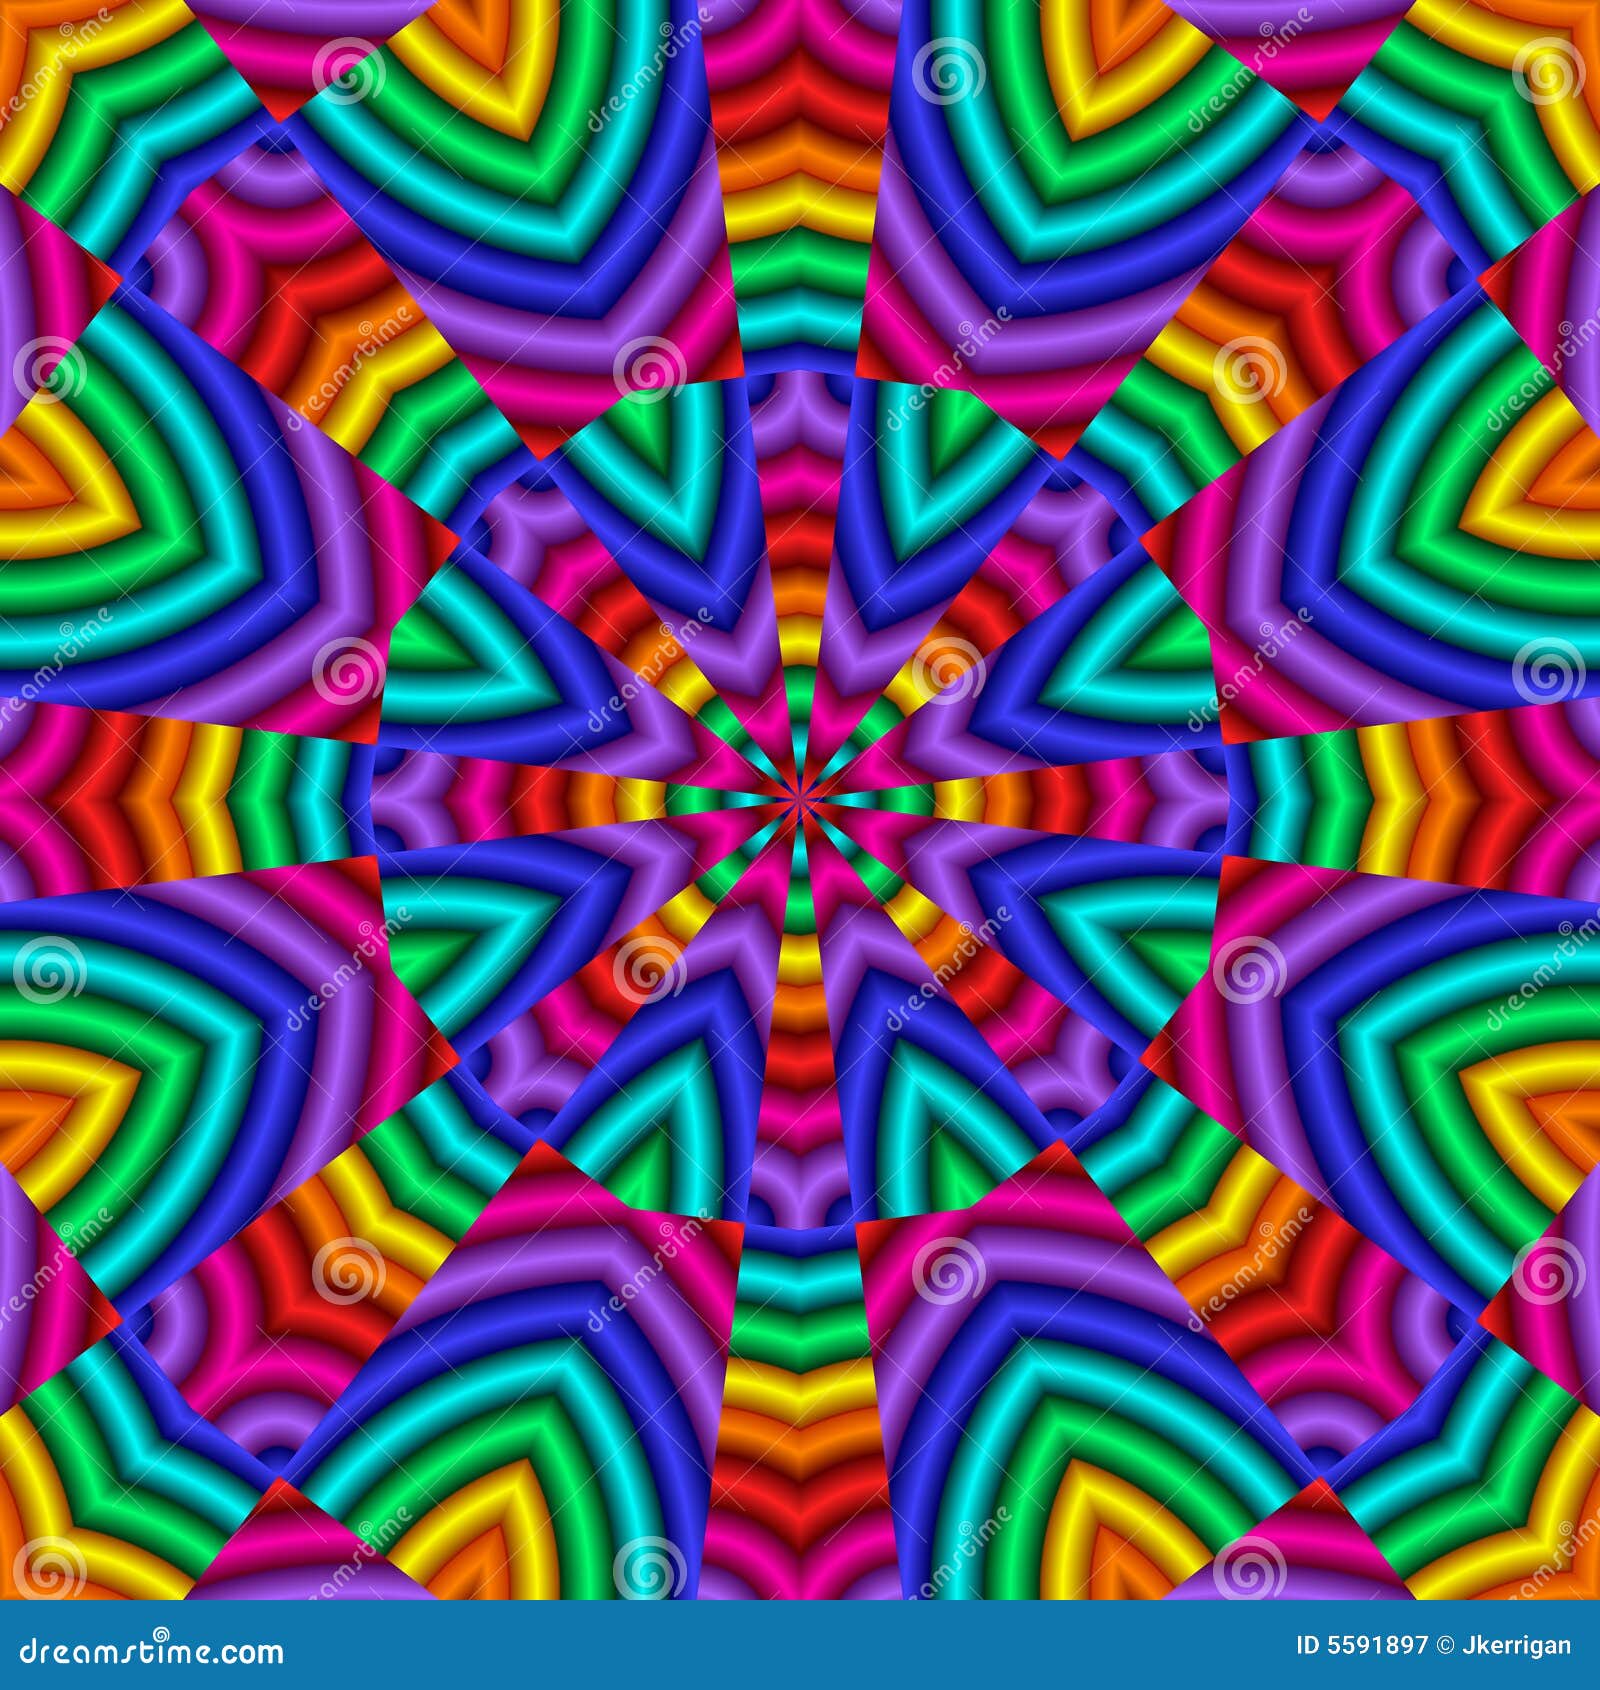 Featured image of post Rainbow Kaleidoscope Pictures See more ideas about kaleidoscope kaleidoscope images stereoscopic